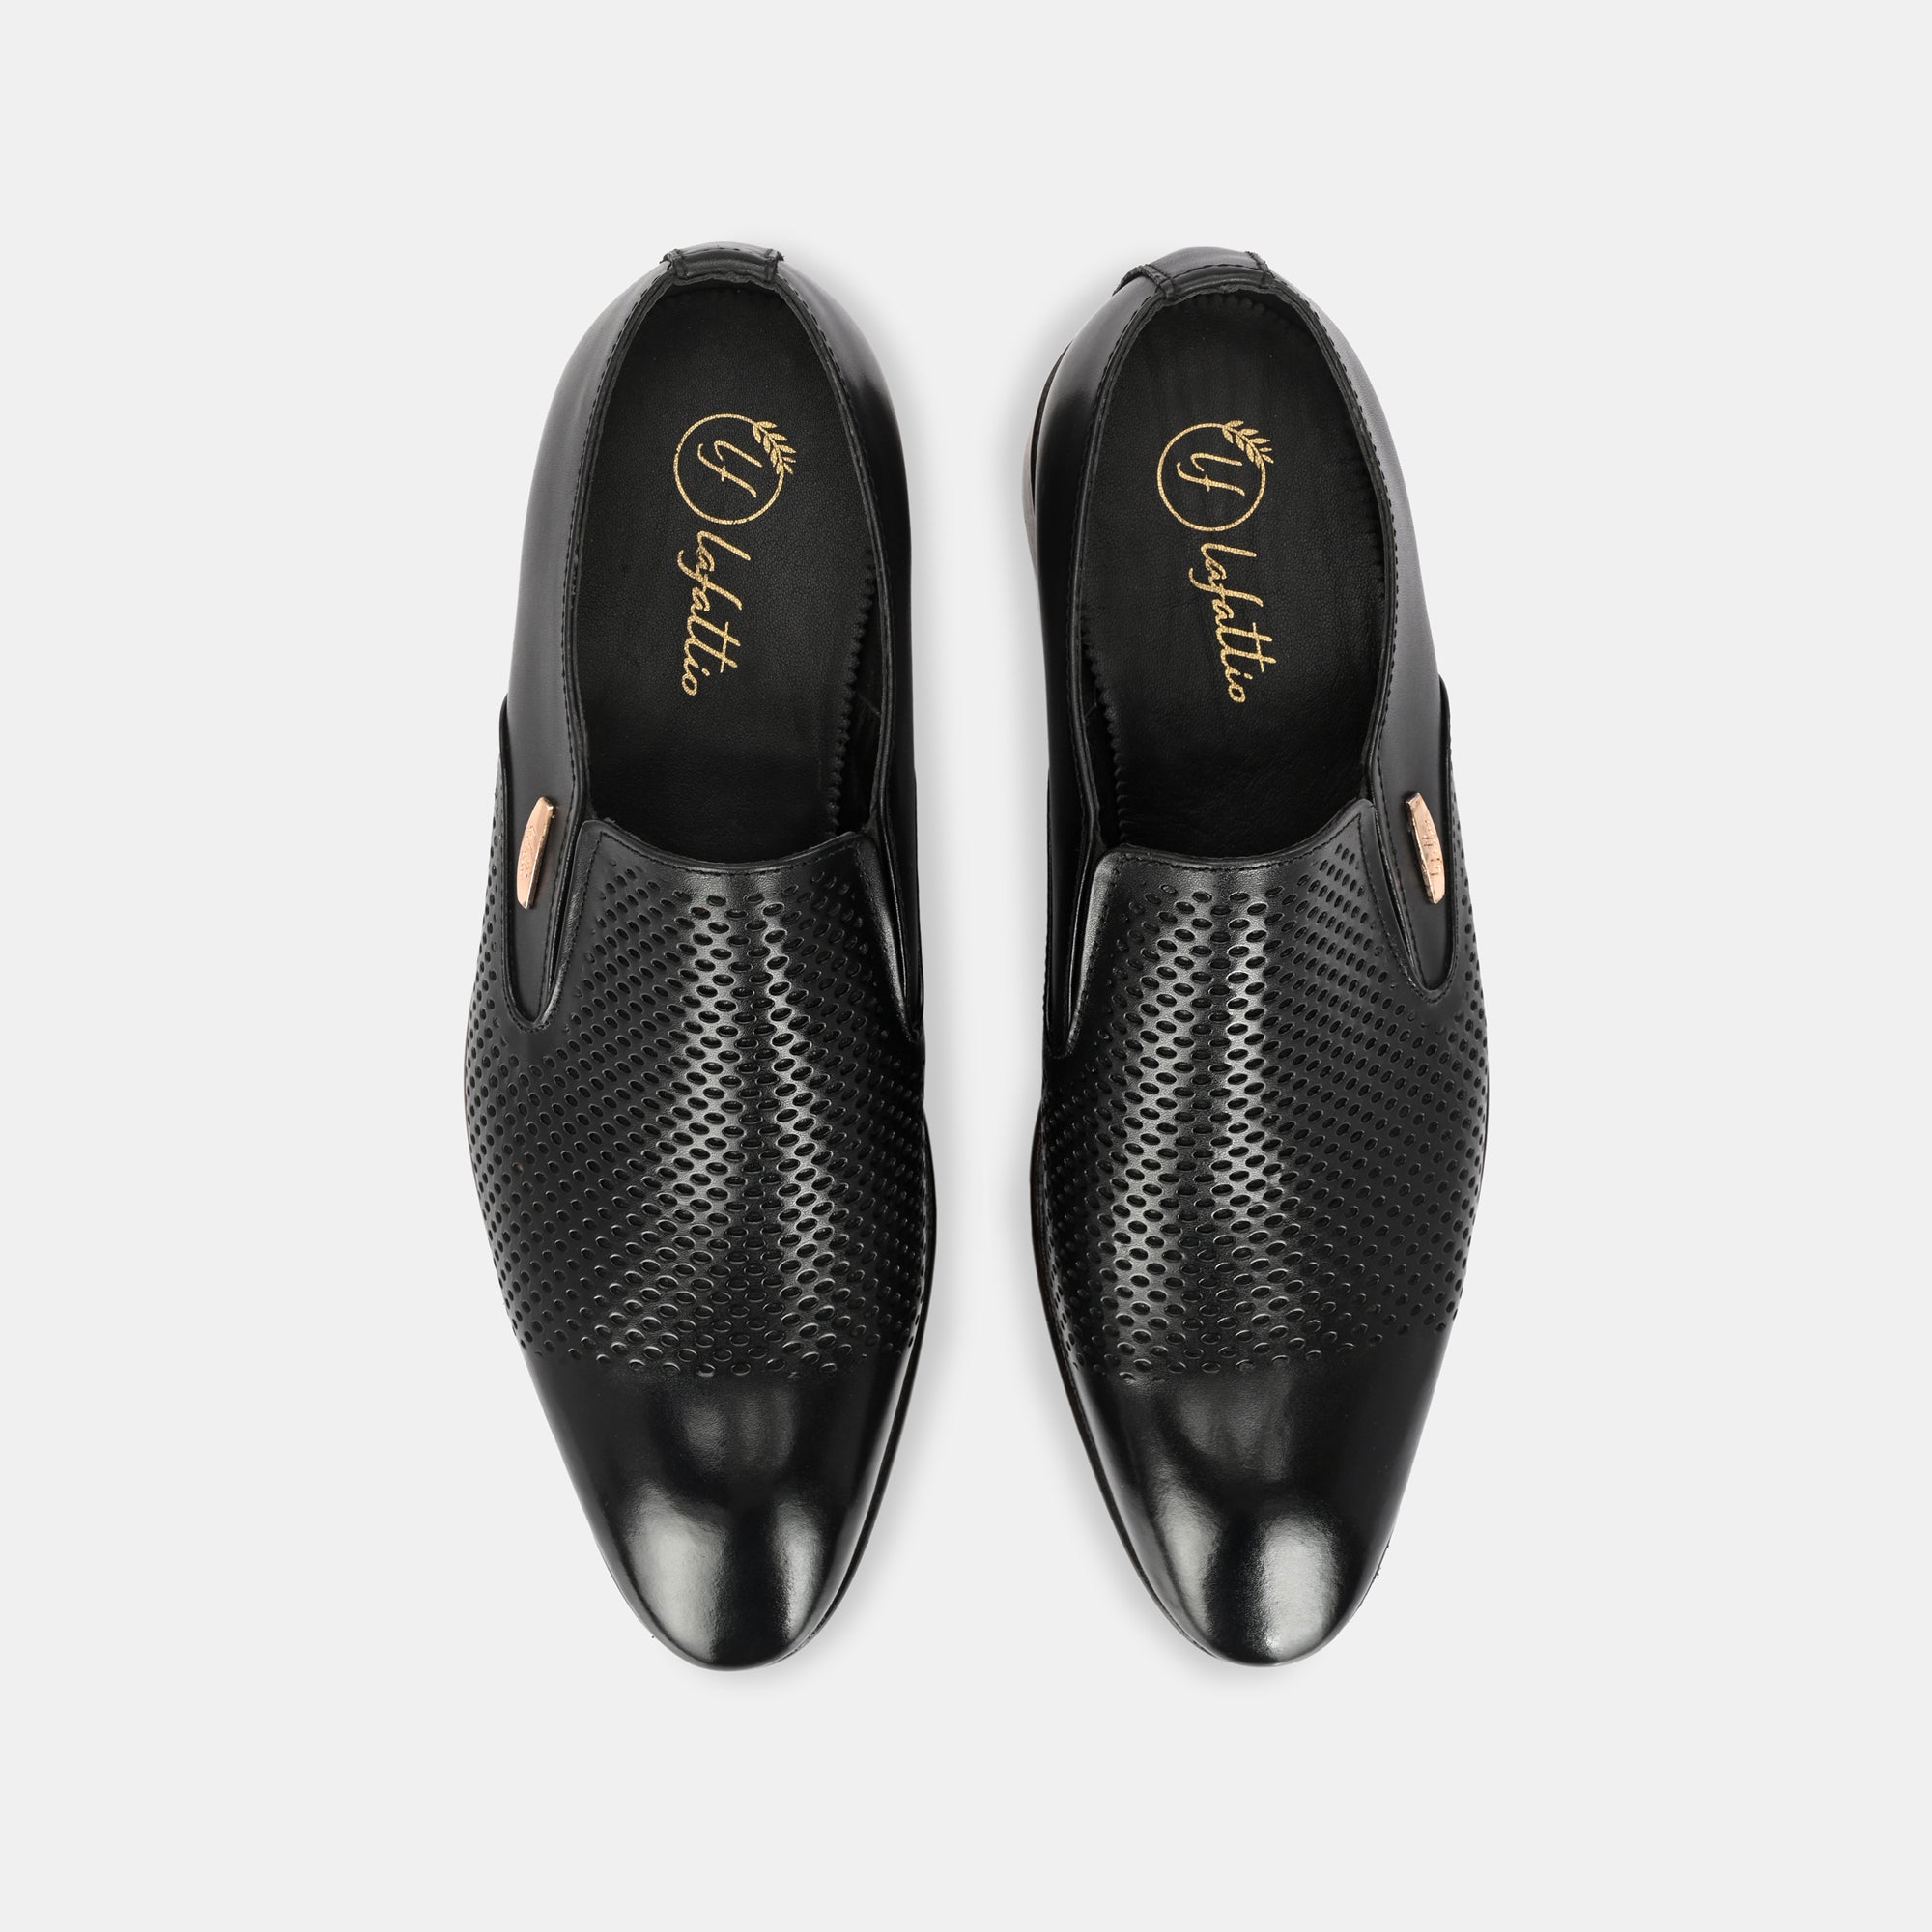 Black Perforated Moccasins by Lafattio